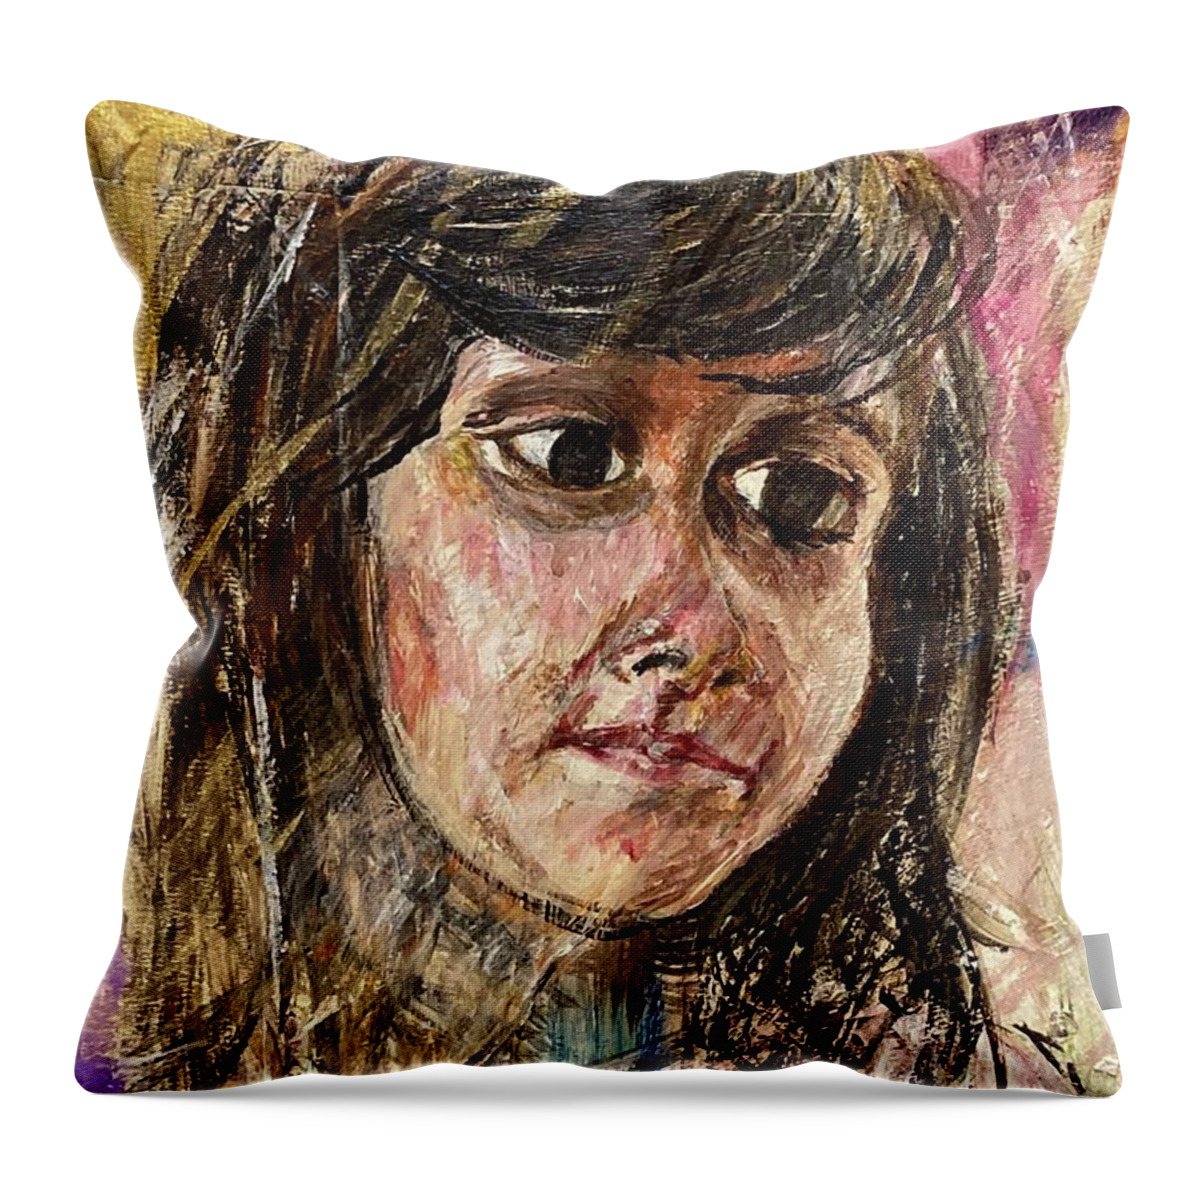 Portrait Of A Young Girl On Colorful Background. Part Of A Family Portraits Series. Throw Pillow featuring the painting Girl by David Euler